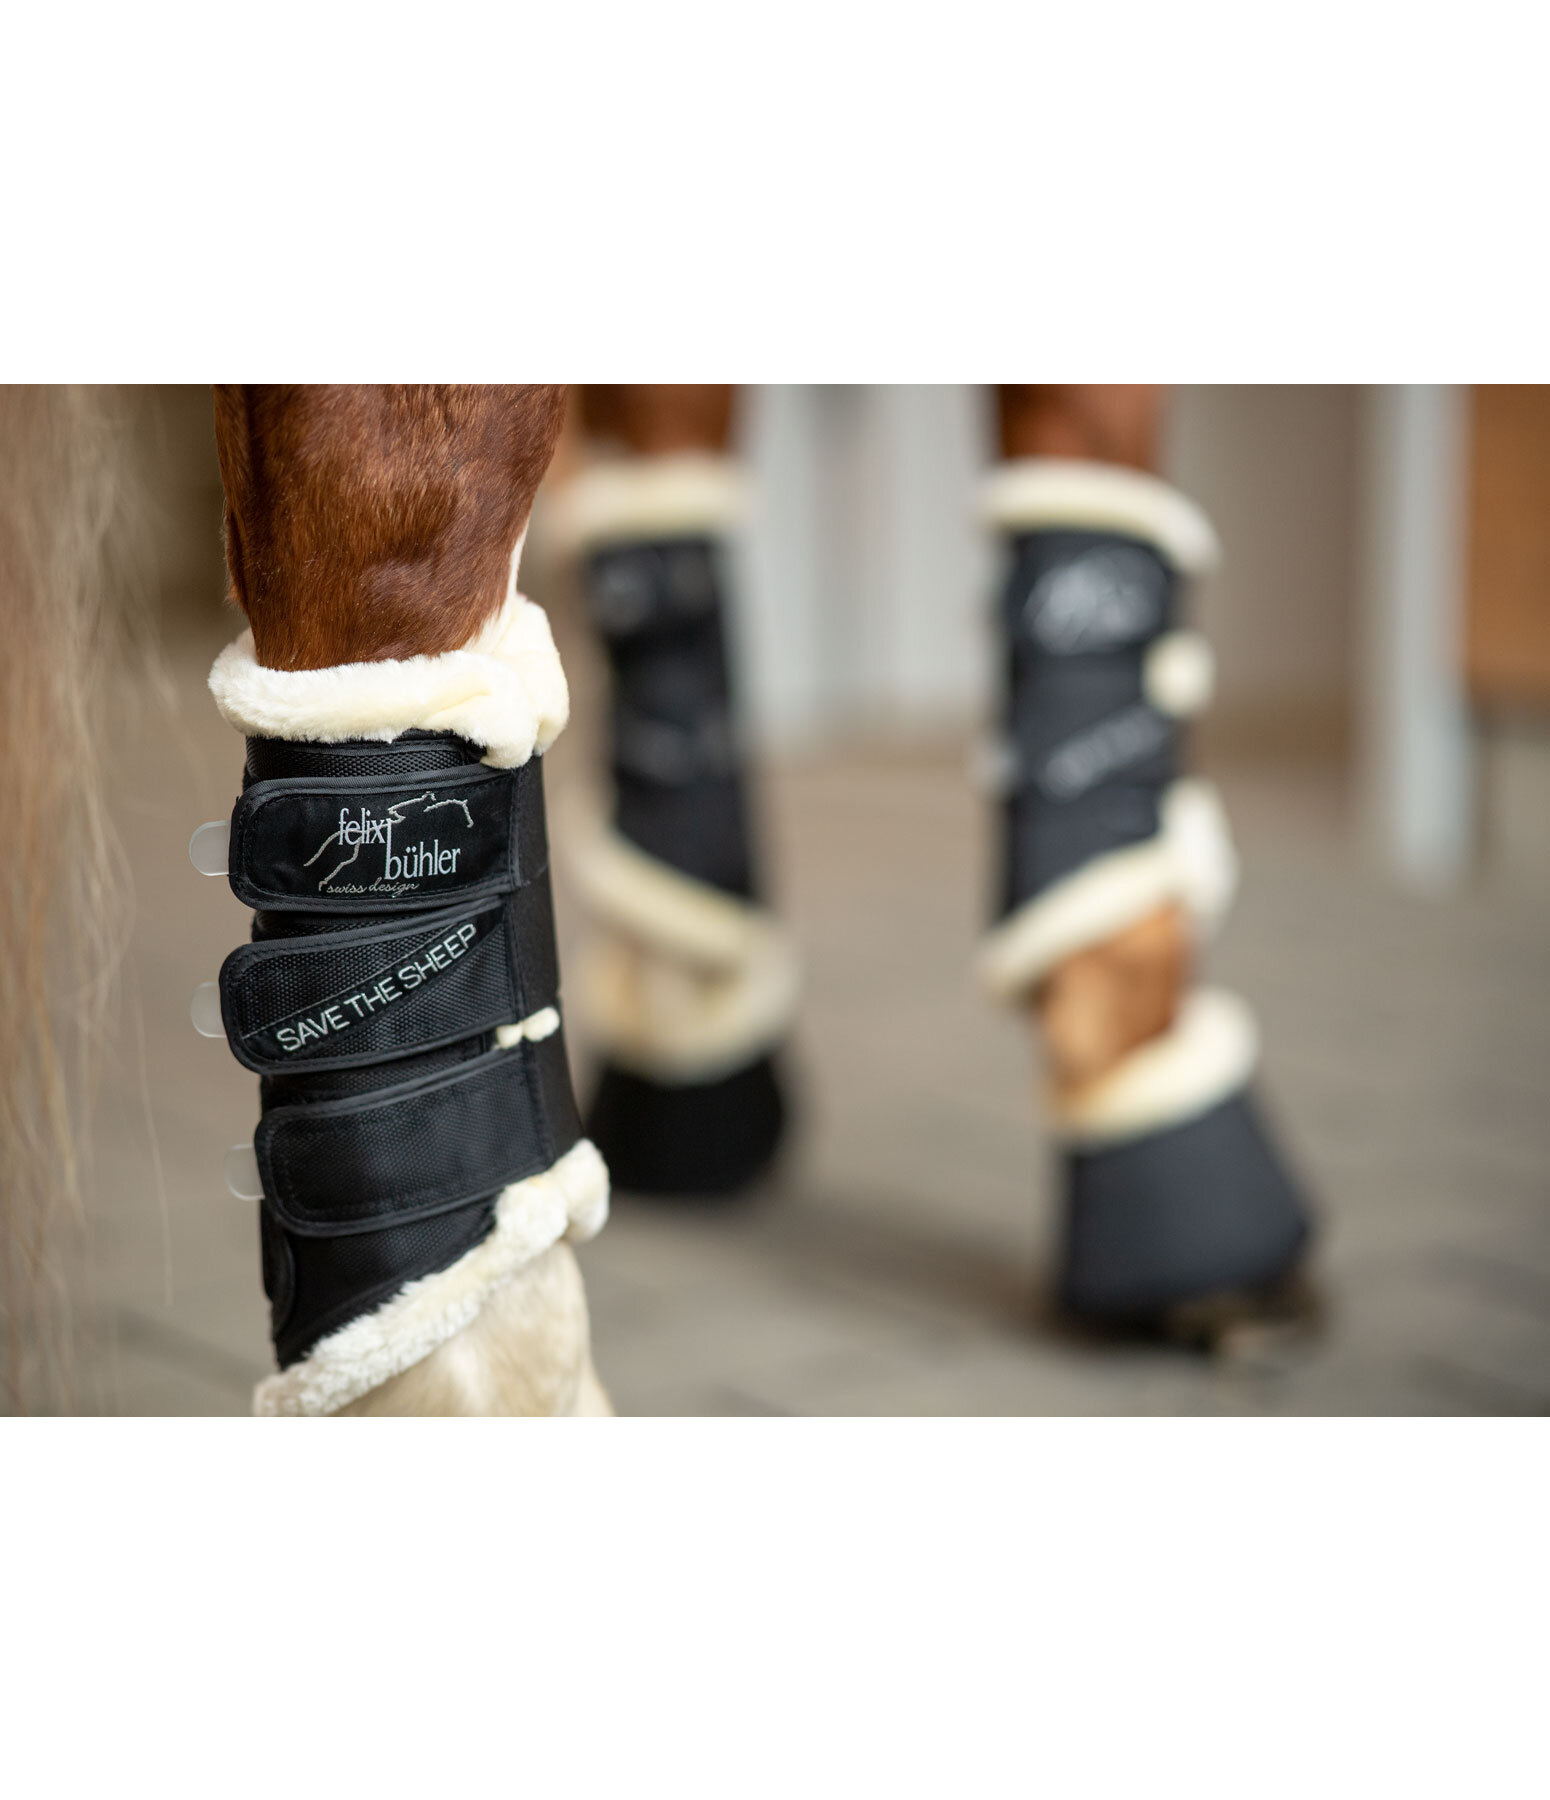 Dressage Boots Save the Sheep, Hind Legs